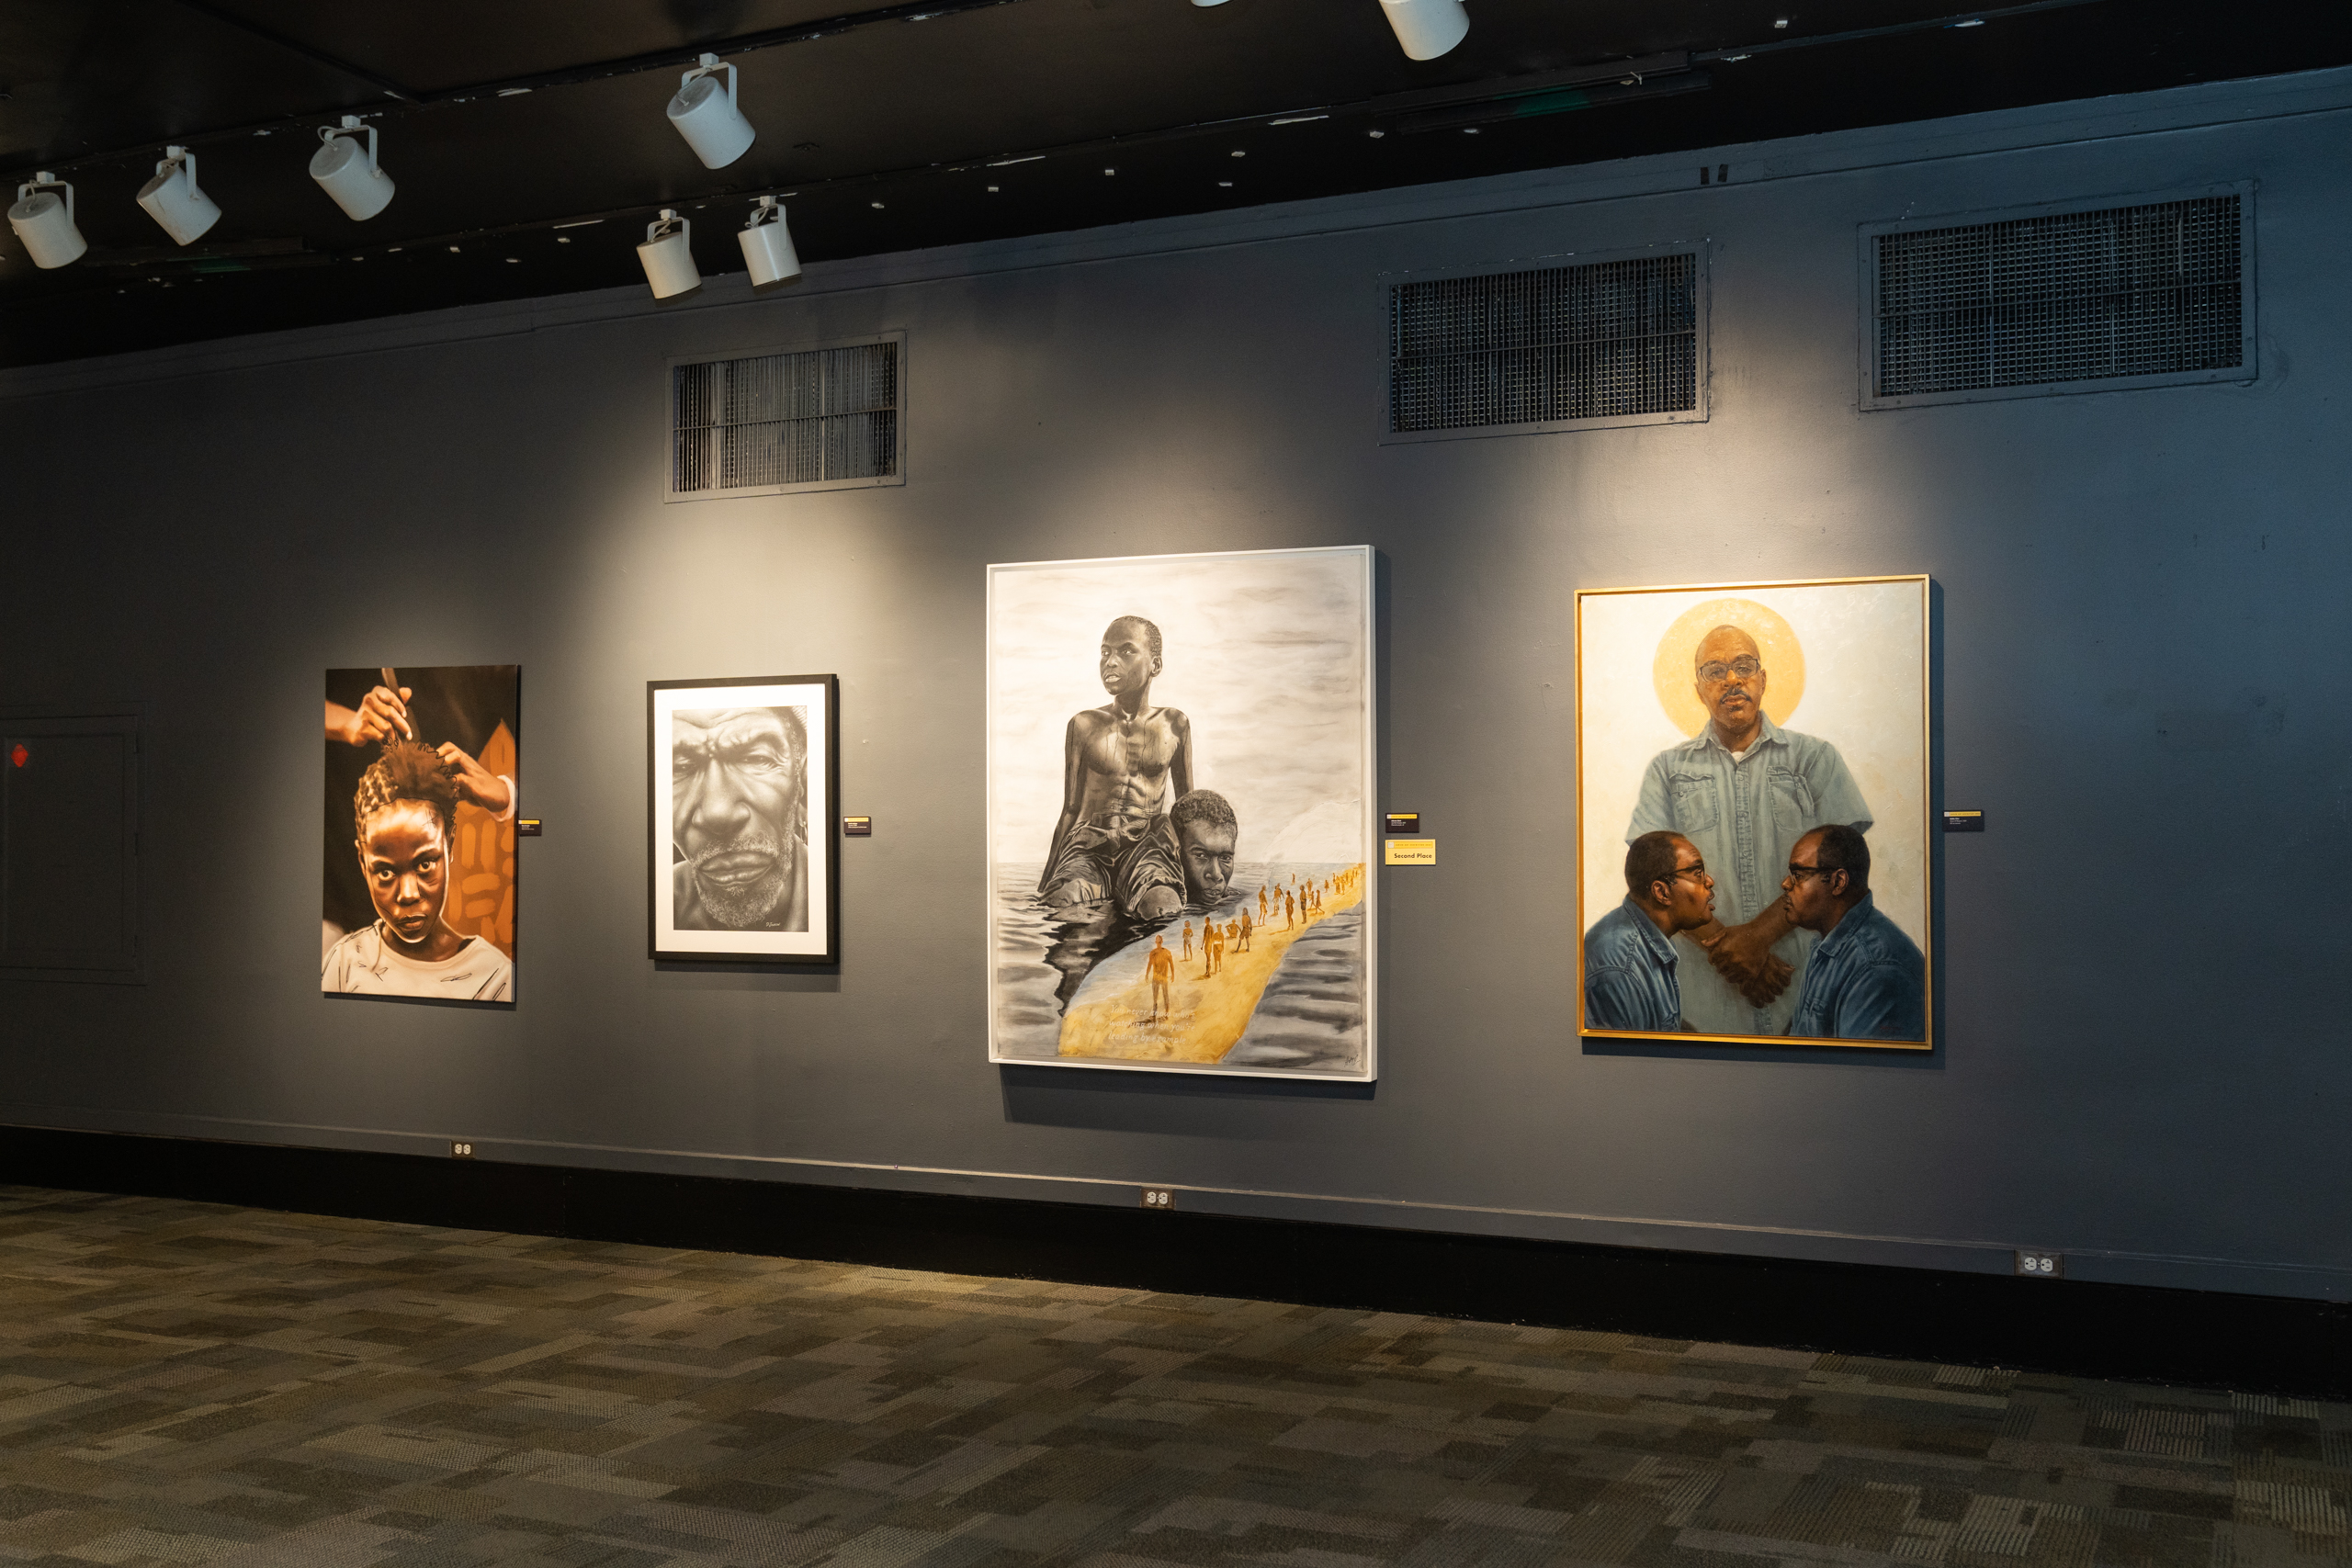 Black Creativity Juried Art Exhibition - Museum of Science and Industry